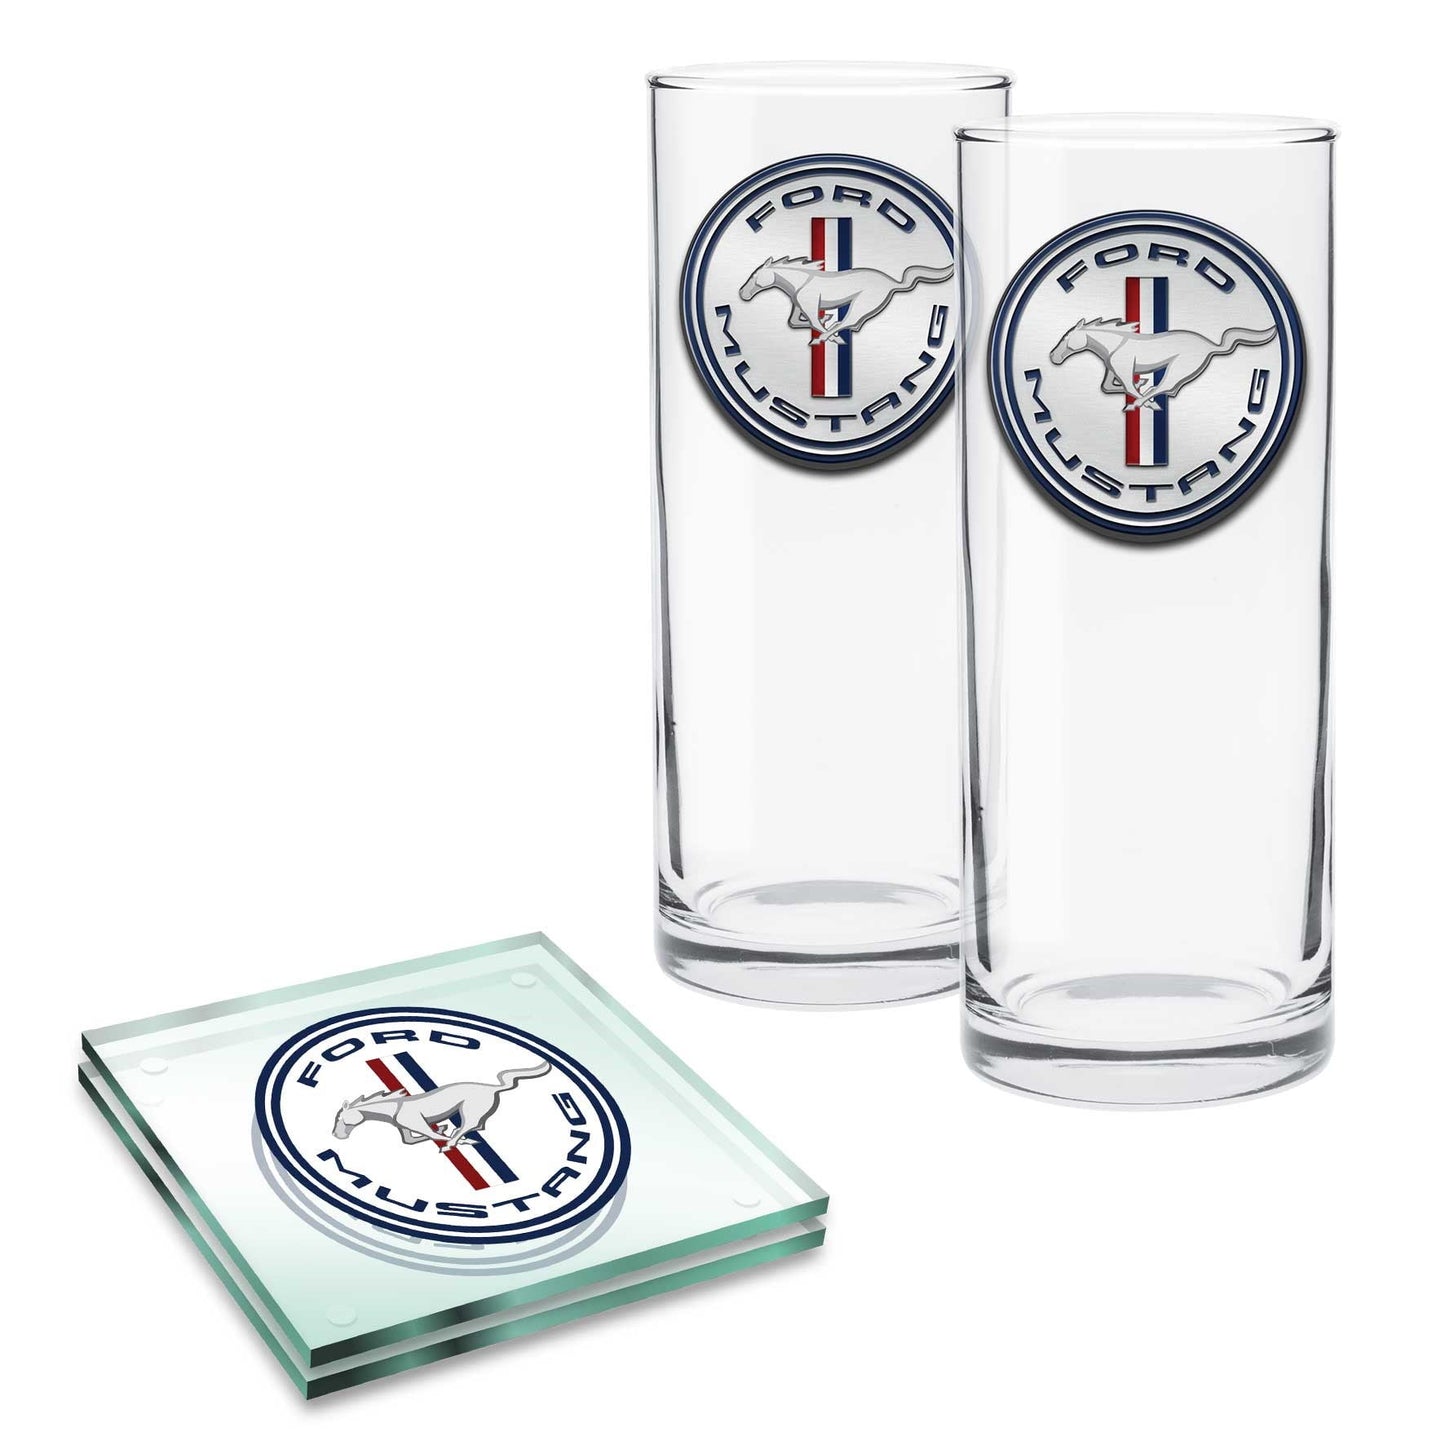 Ford Mustang Set of 2 Highball Glasses and Glass Coasters